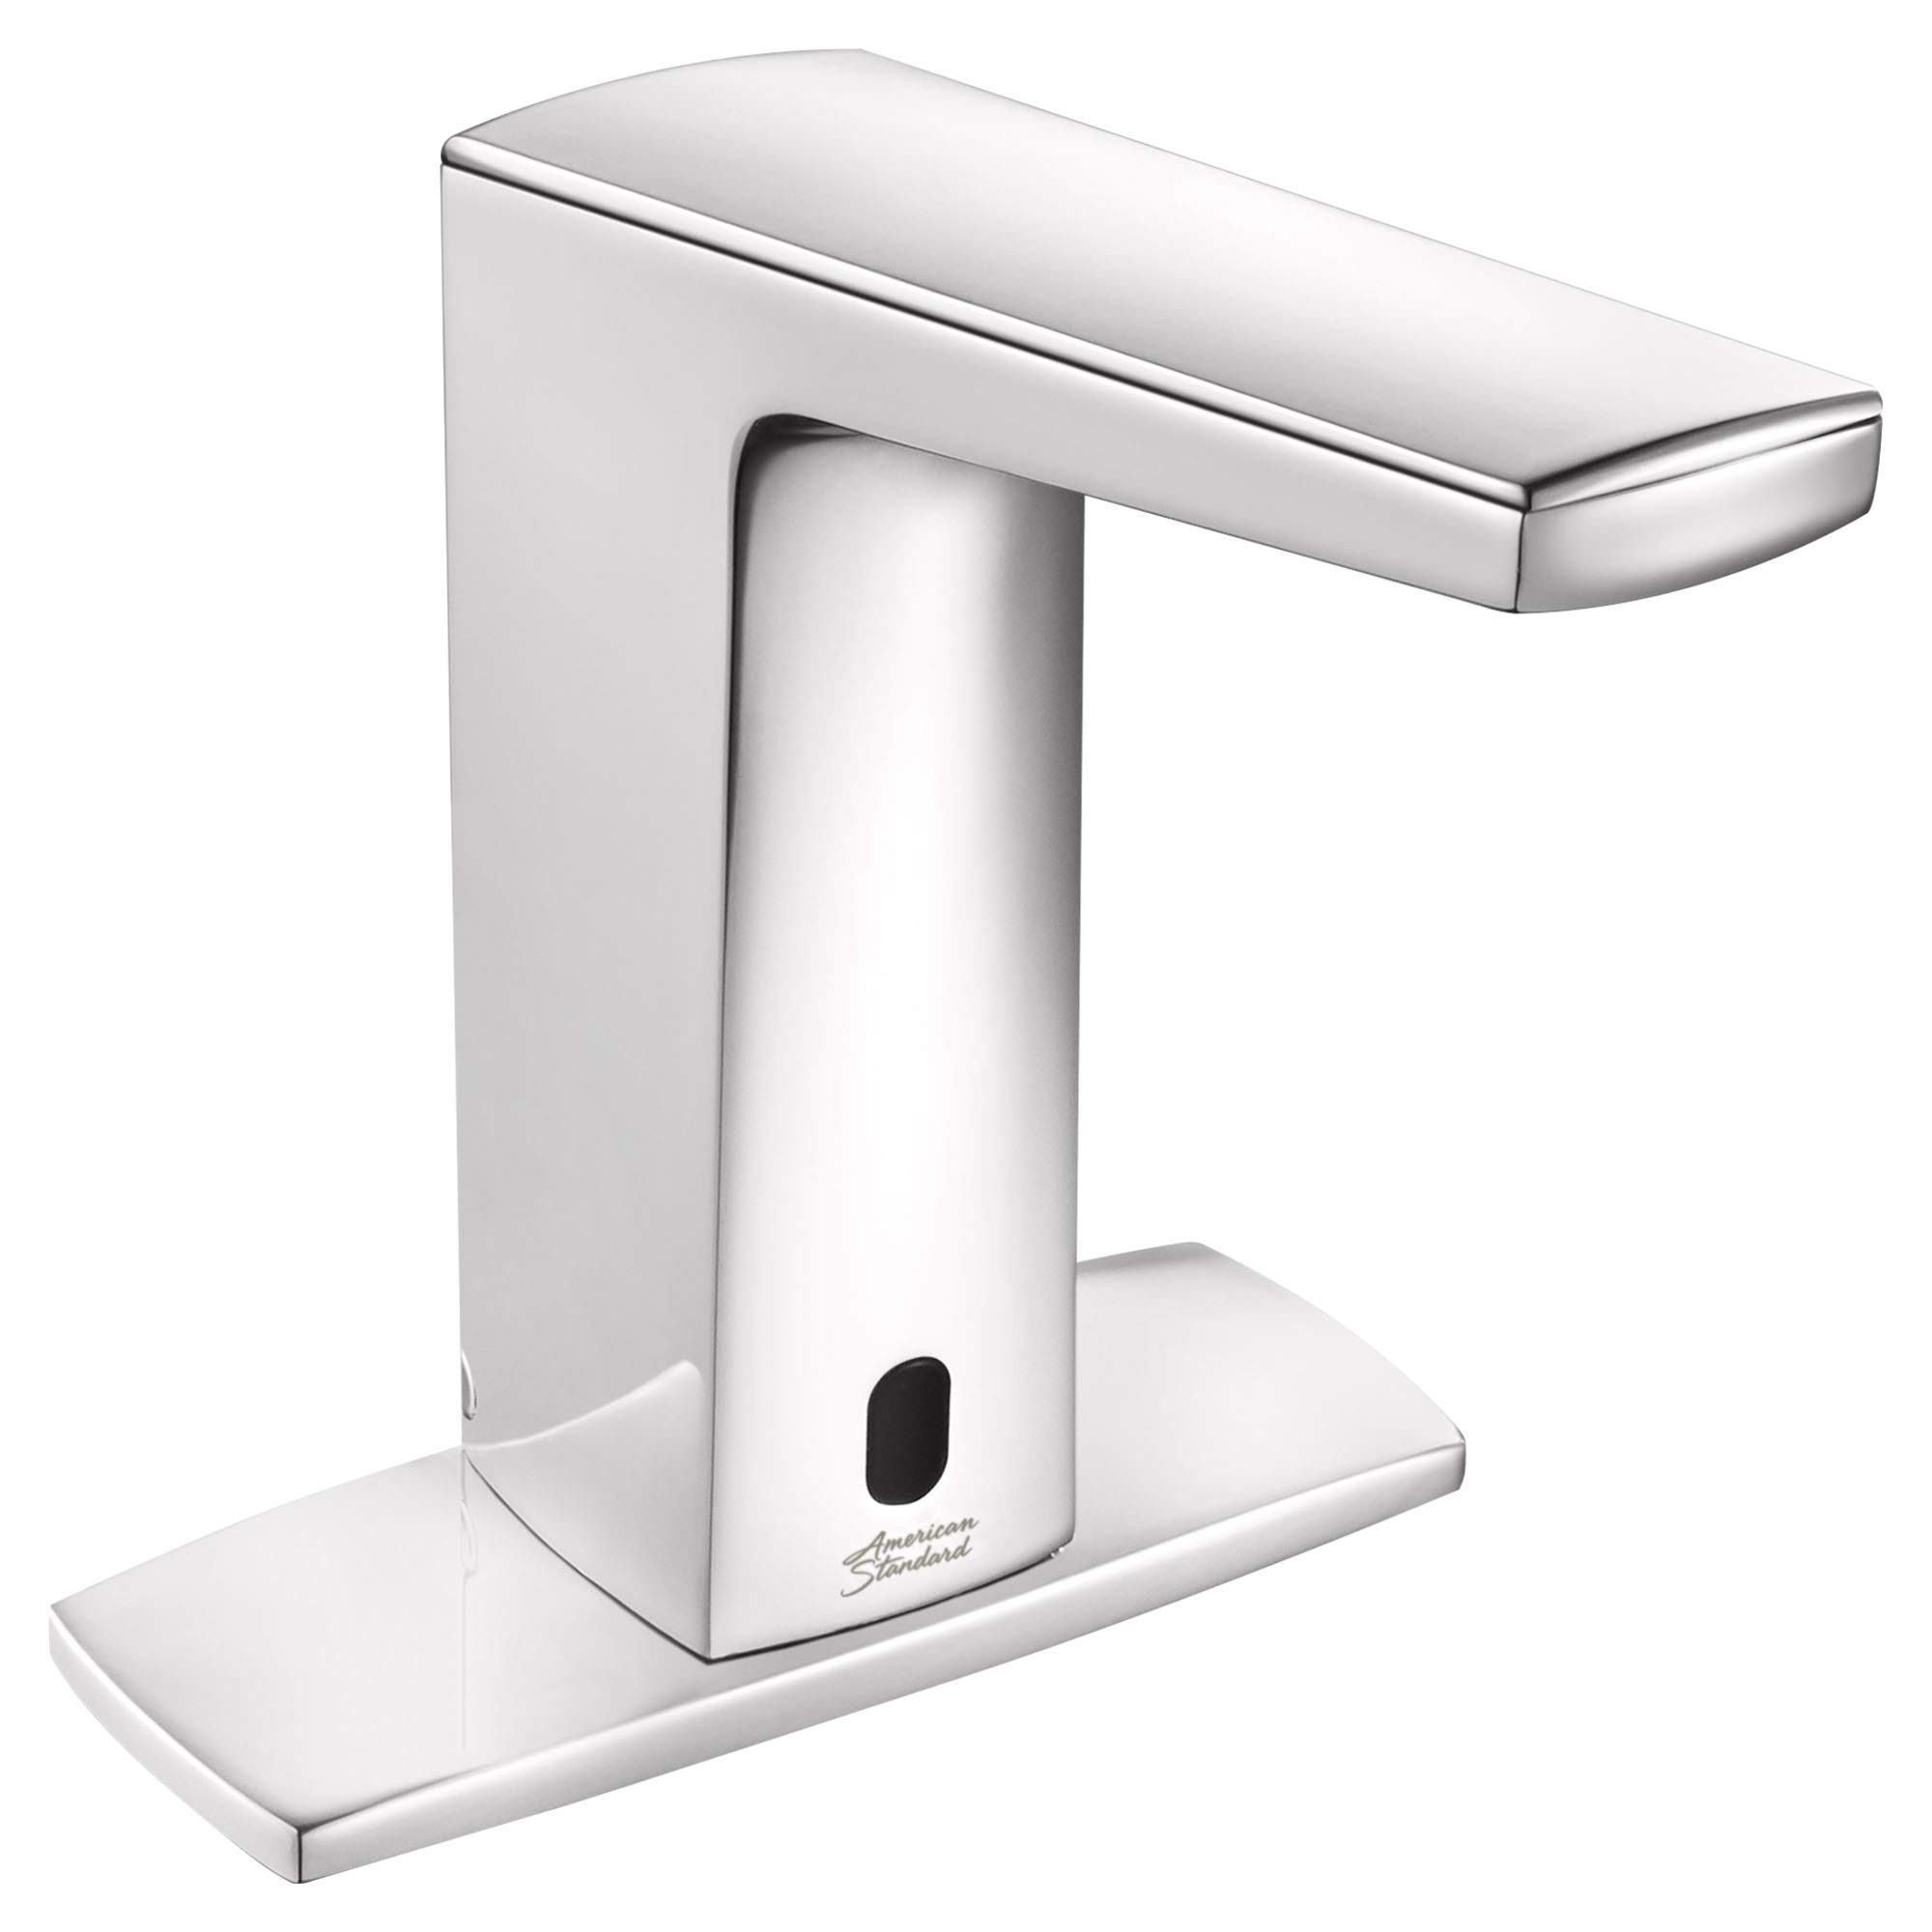 American Standard 7025105.002 Paradigm Selectronic Integrated Faucet, Battery-Powered, 0.5 gpm, Polished Chrome